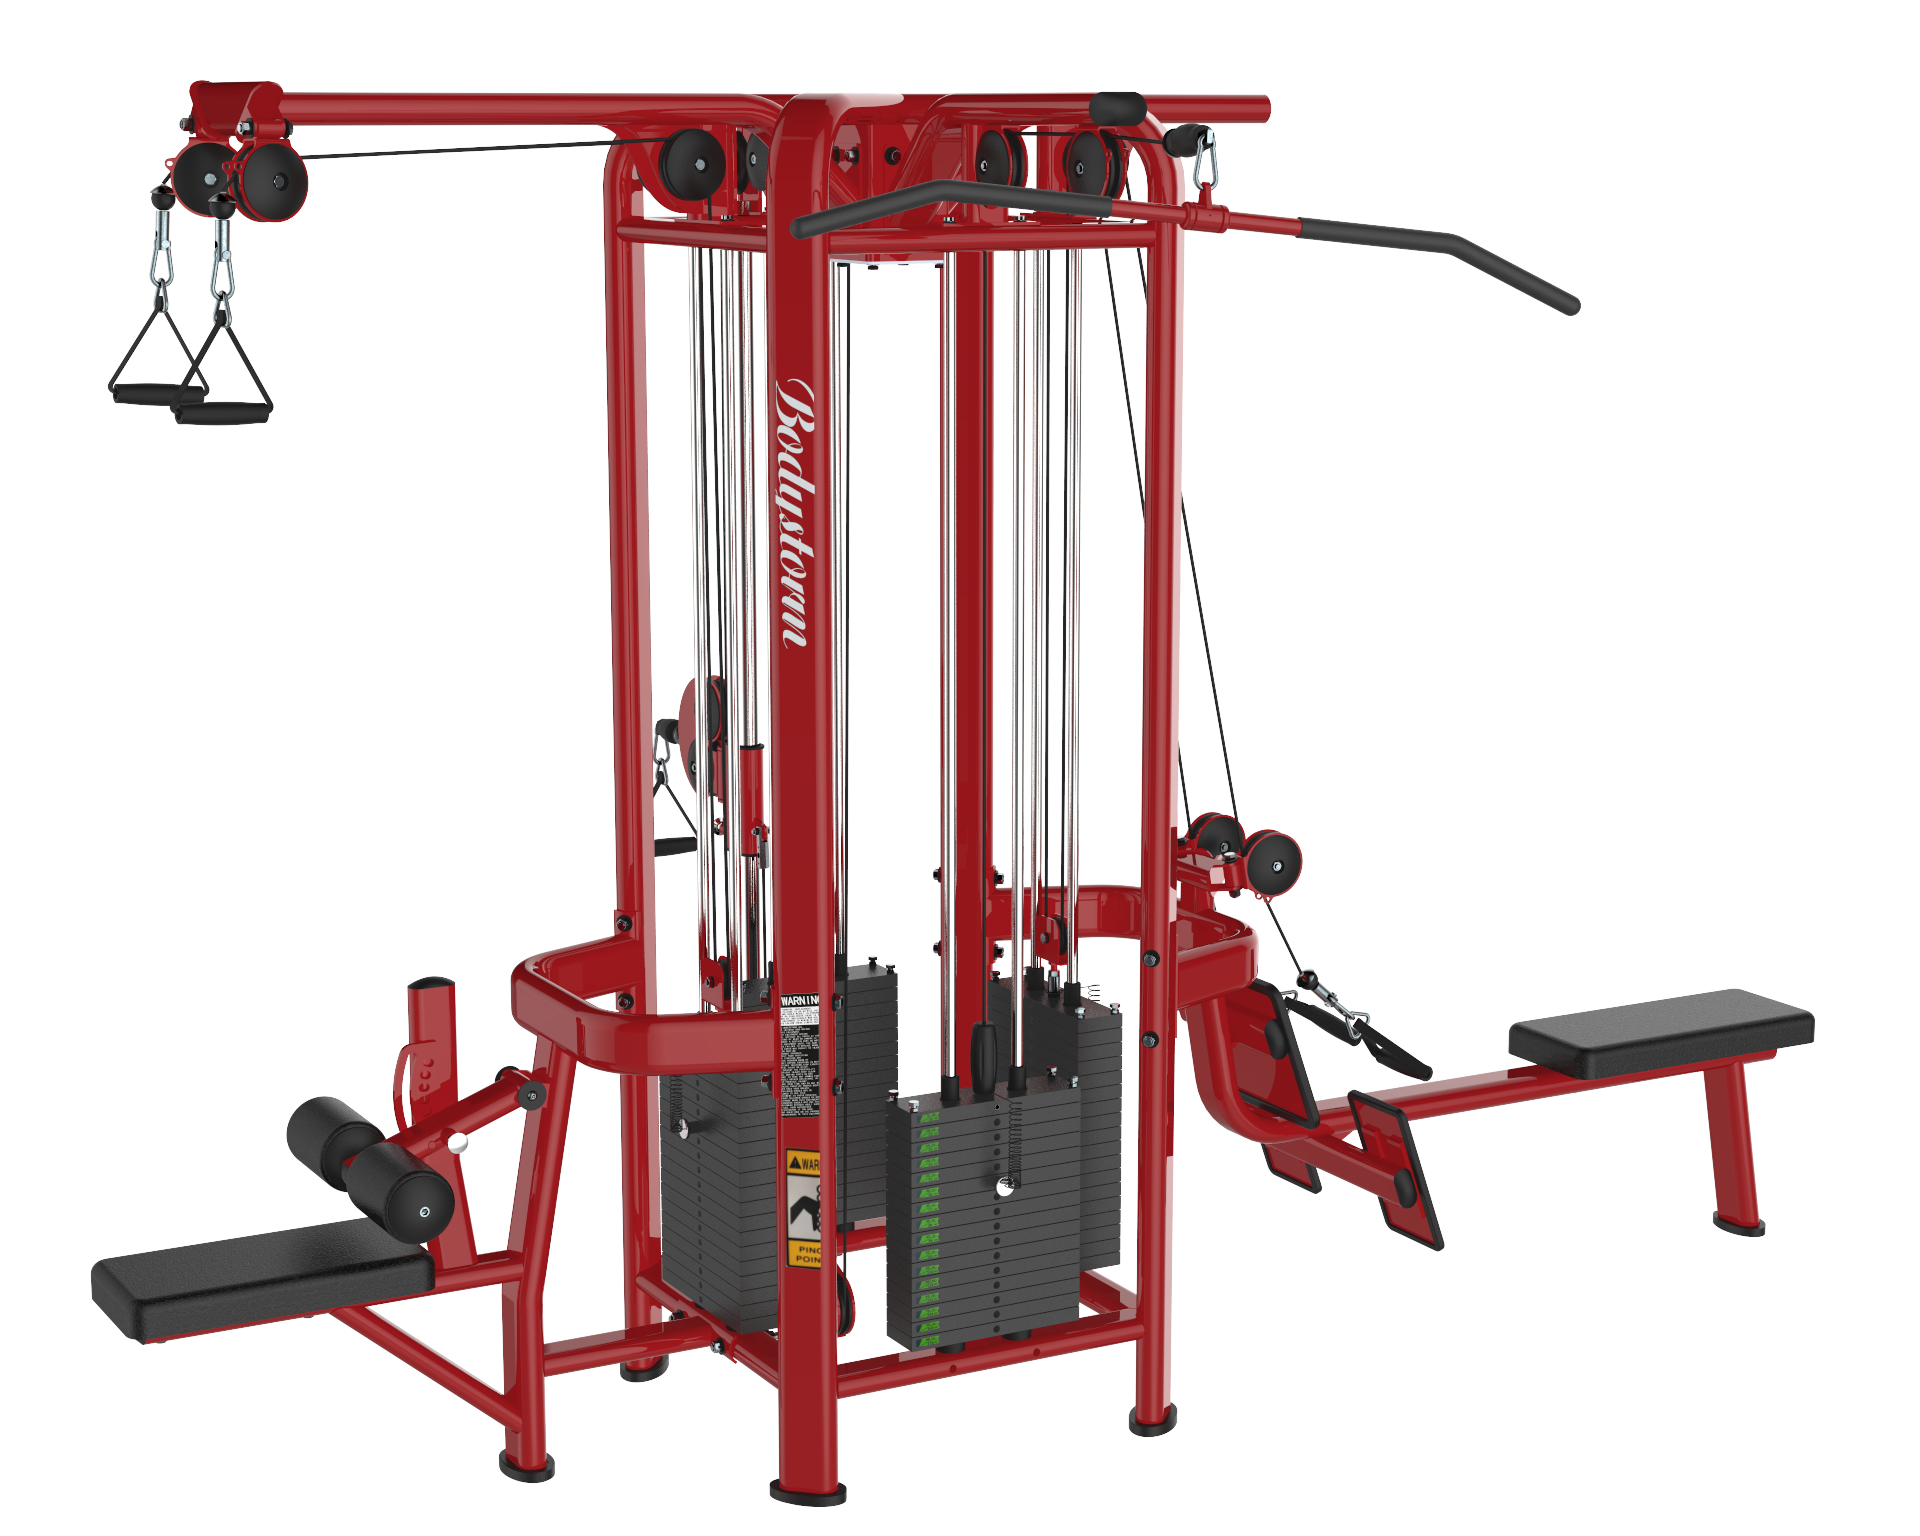 Four Station Multi - Jungle  multi Function Station workout gym fitness equipment